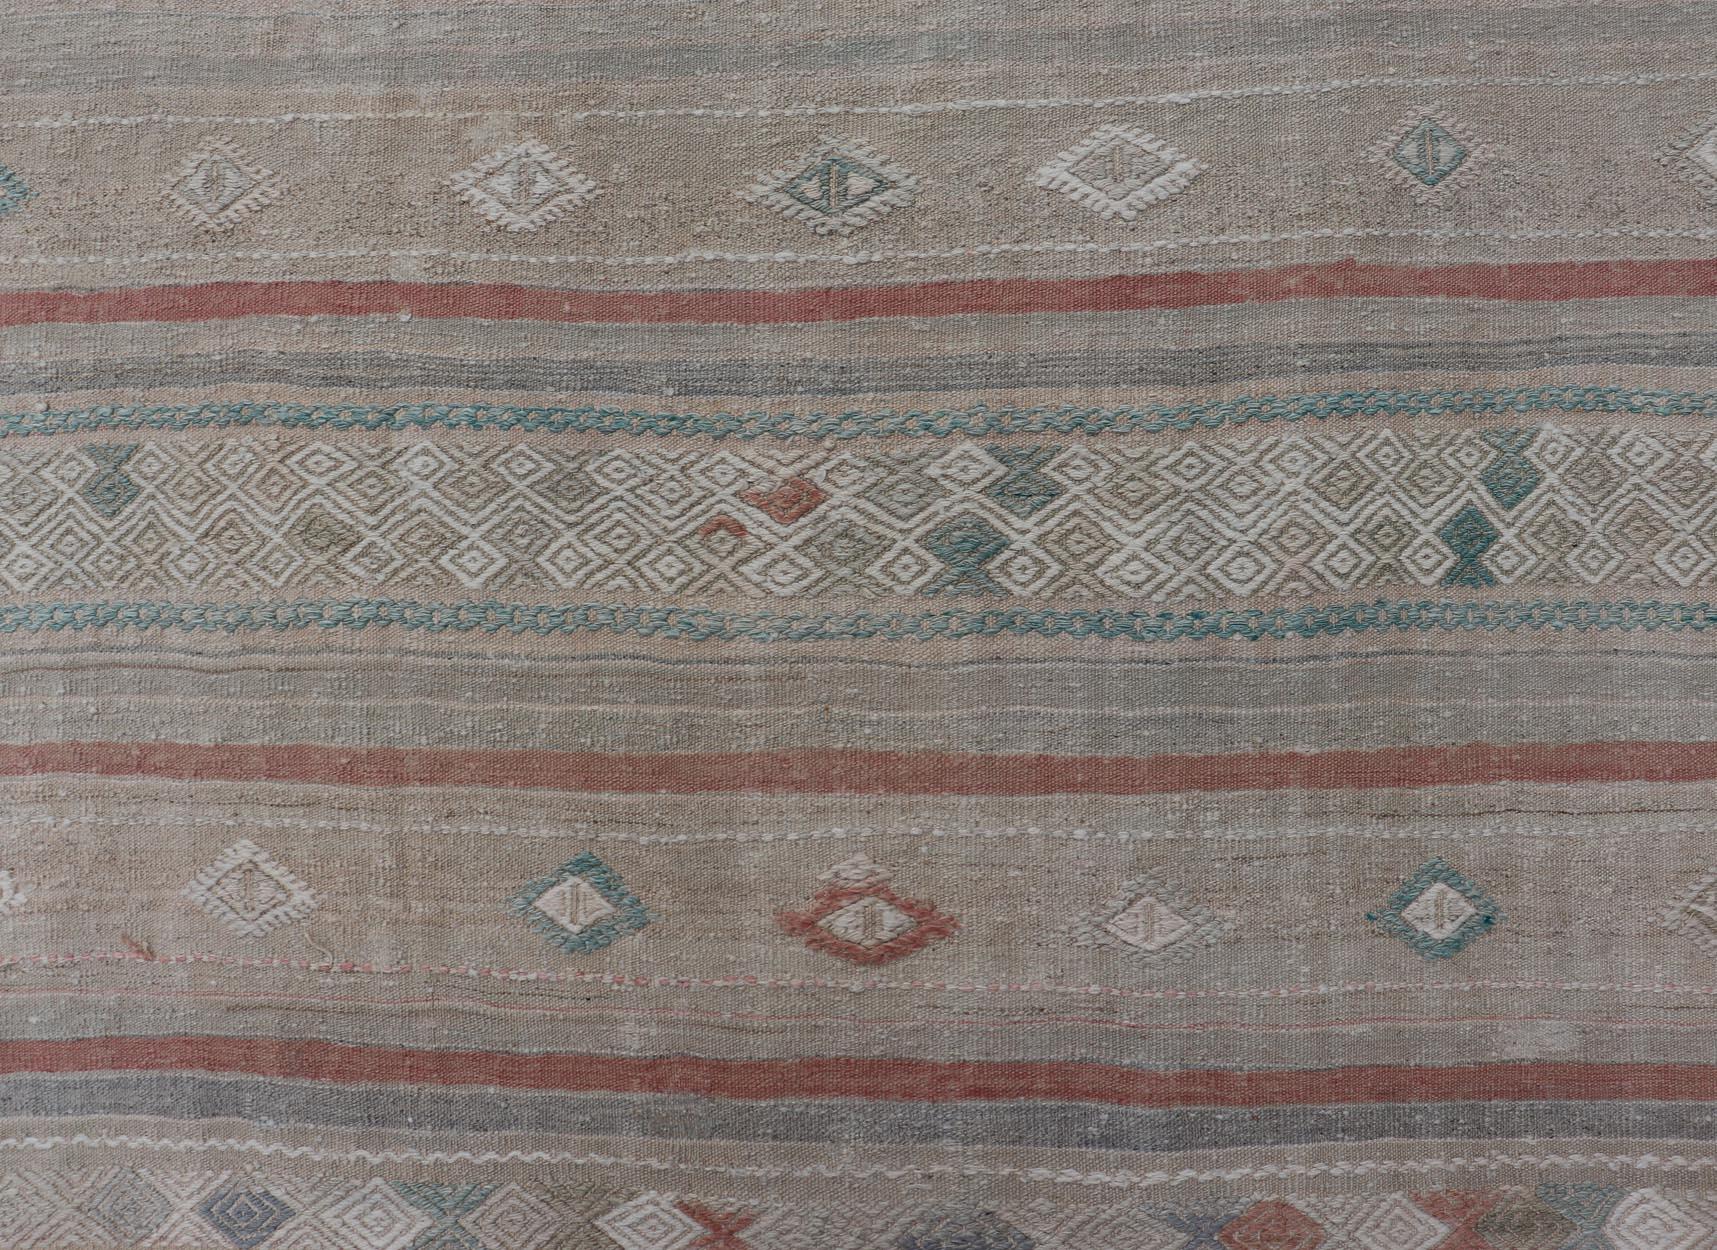 20th Century Turkish Flat-Weave Embroideries Kilim in Taupe, Green, Teal, Cream, and Brown For Sale